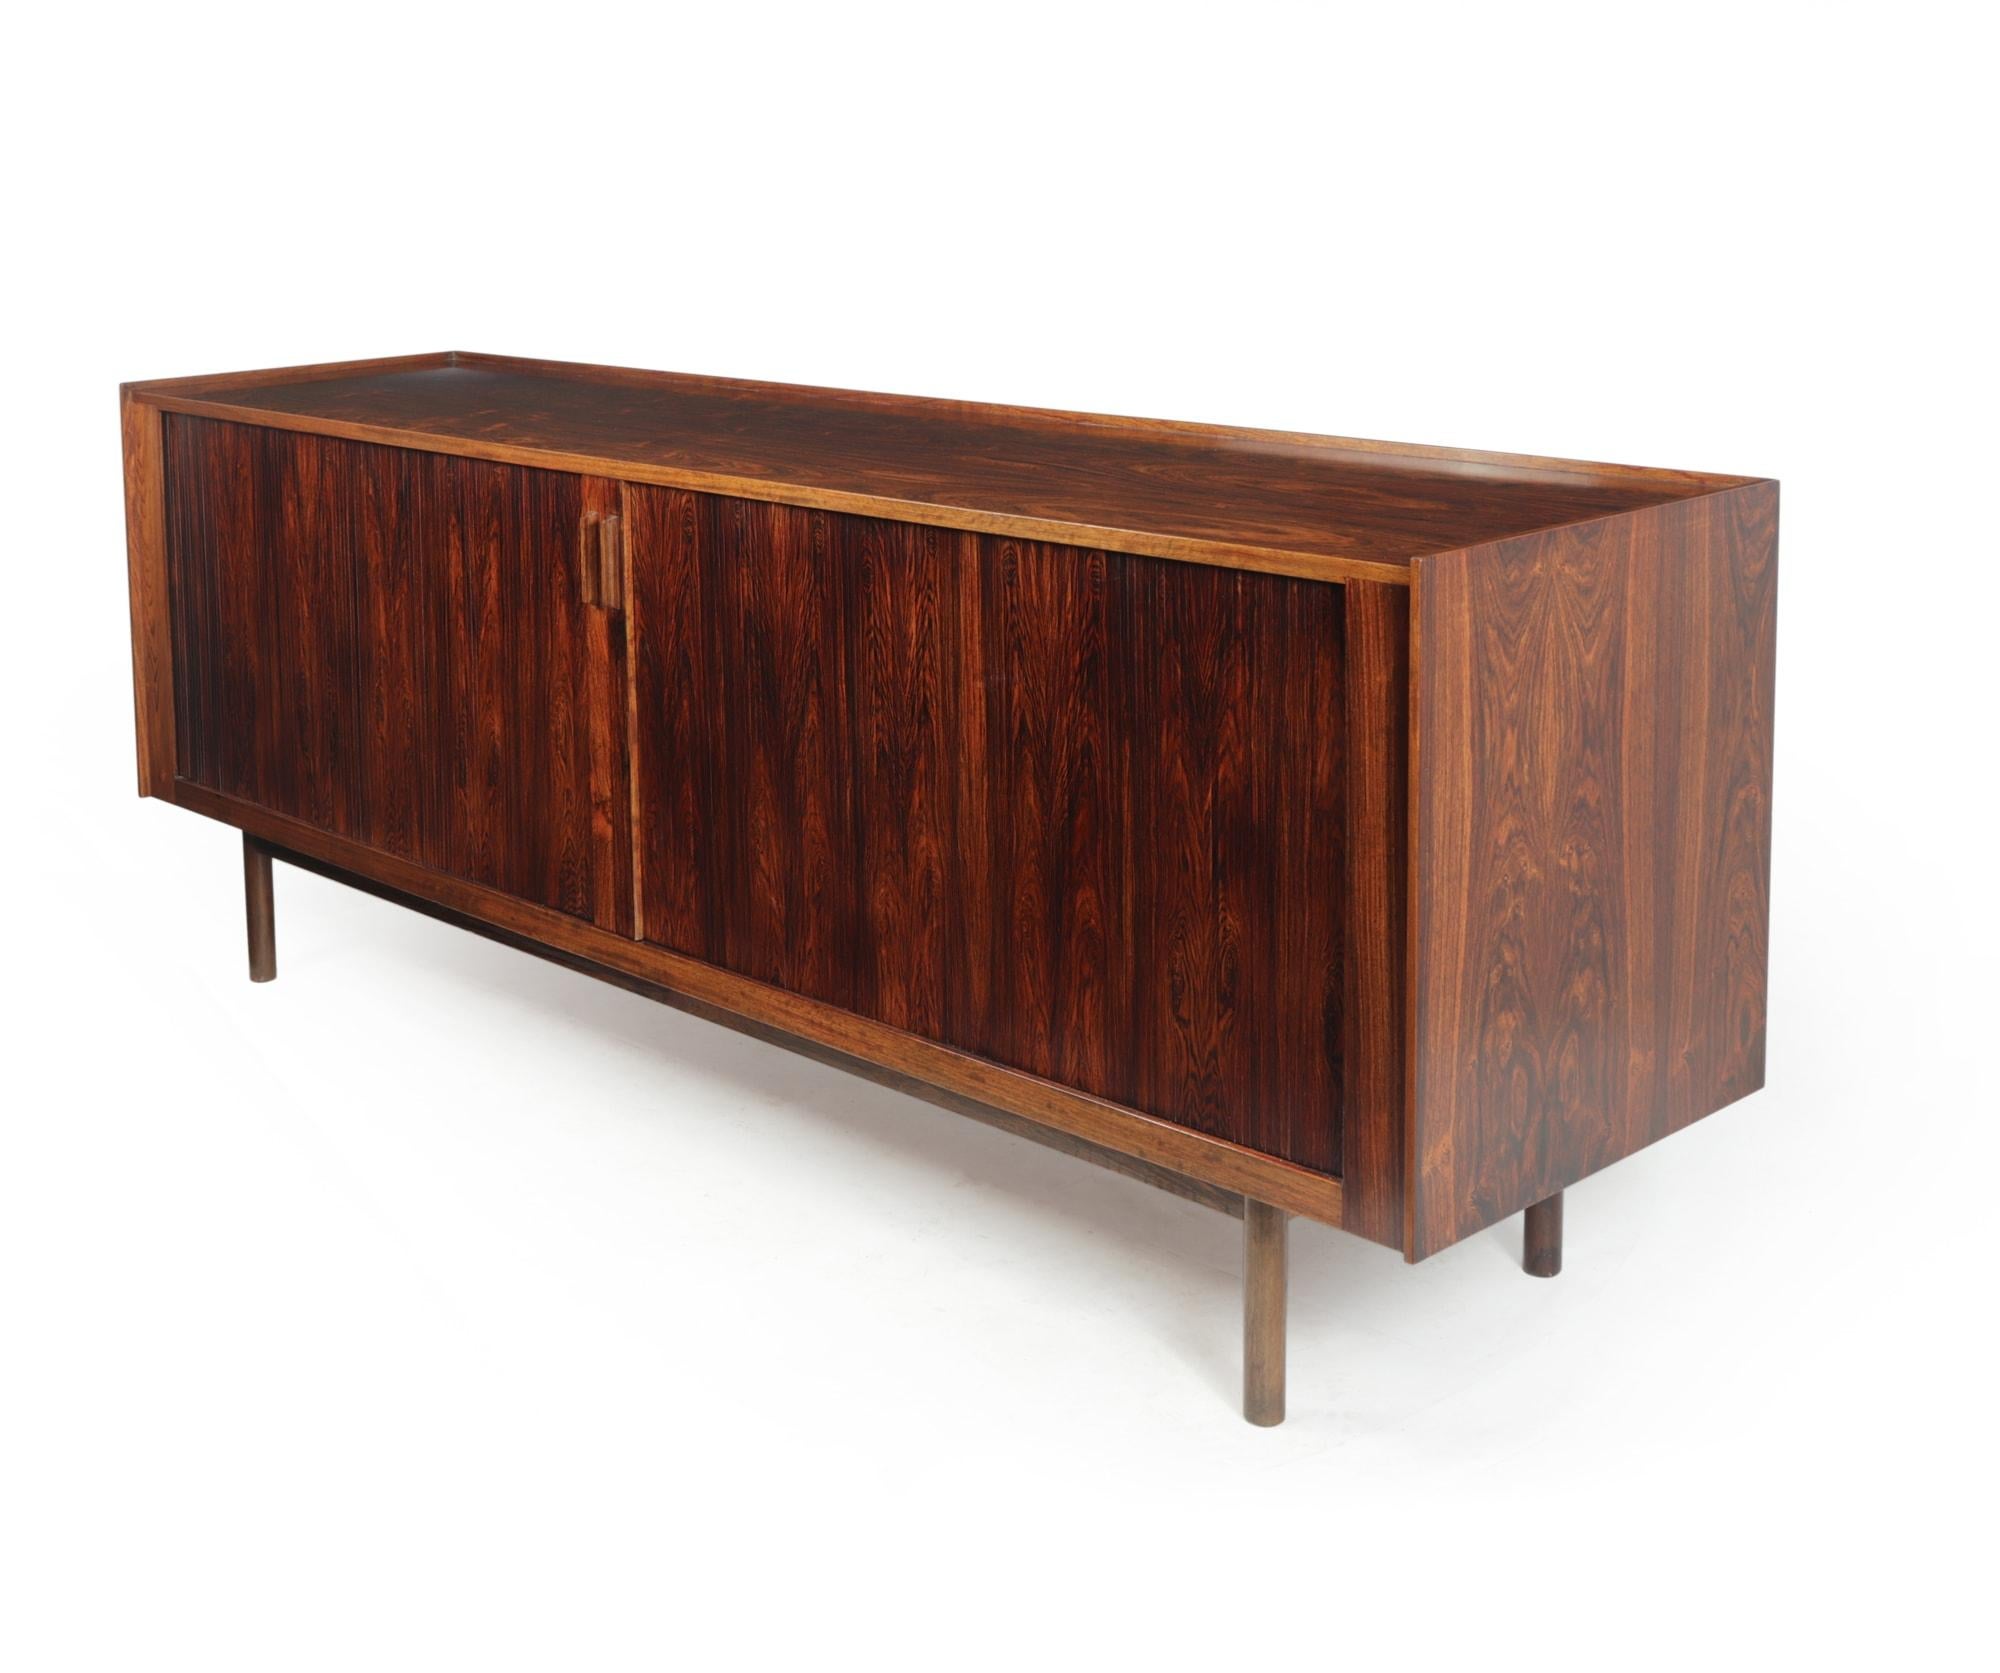 A stunning sideboard designed by Ib Kofod Larsen and produced in Denmark in the 1960’s, it has two sliding tambour doors to reveal adjustable shelves and internal drawers, the top has a ‘lipped edge’ this all sits on four turned legs. The Sideboard